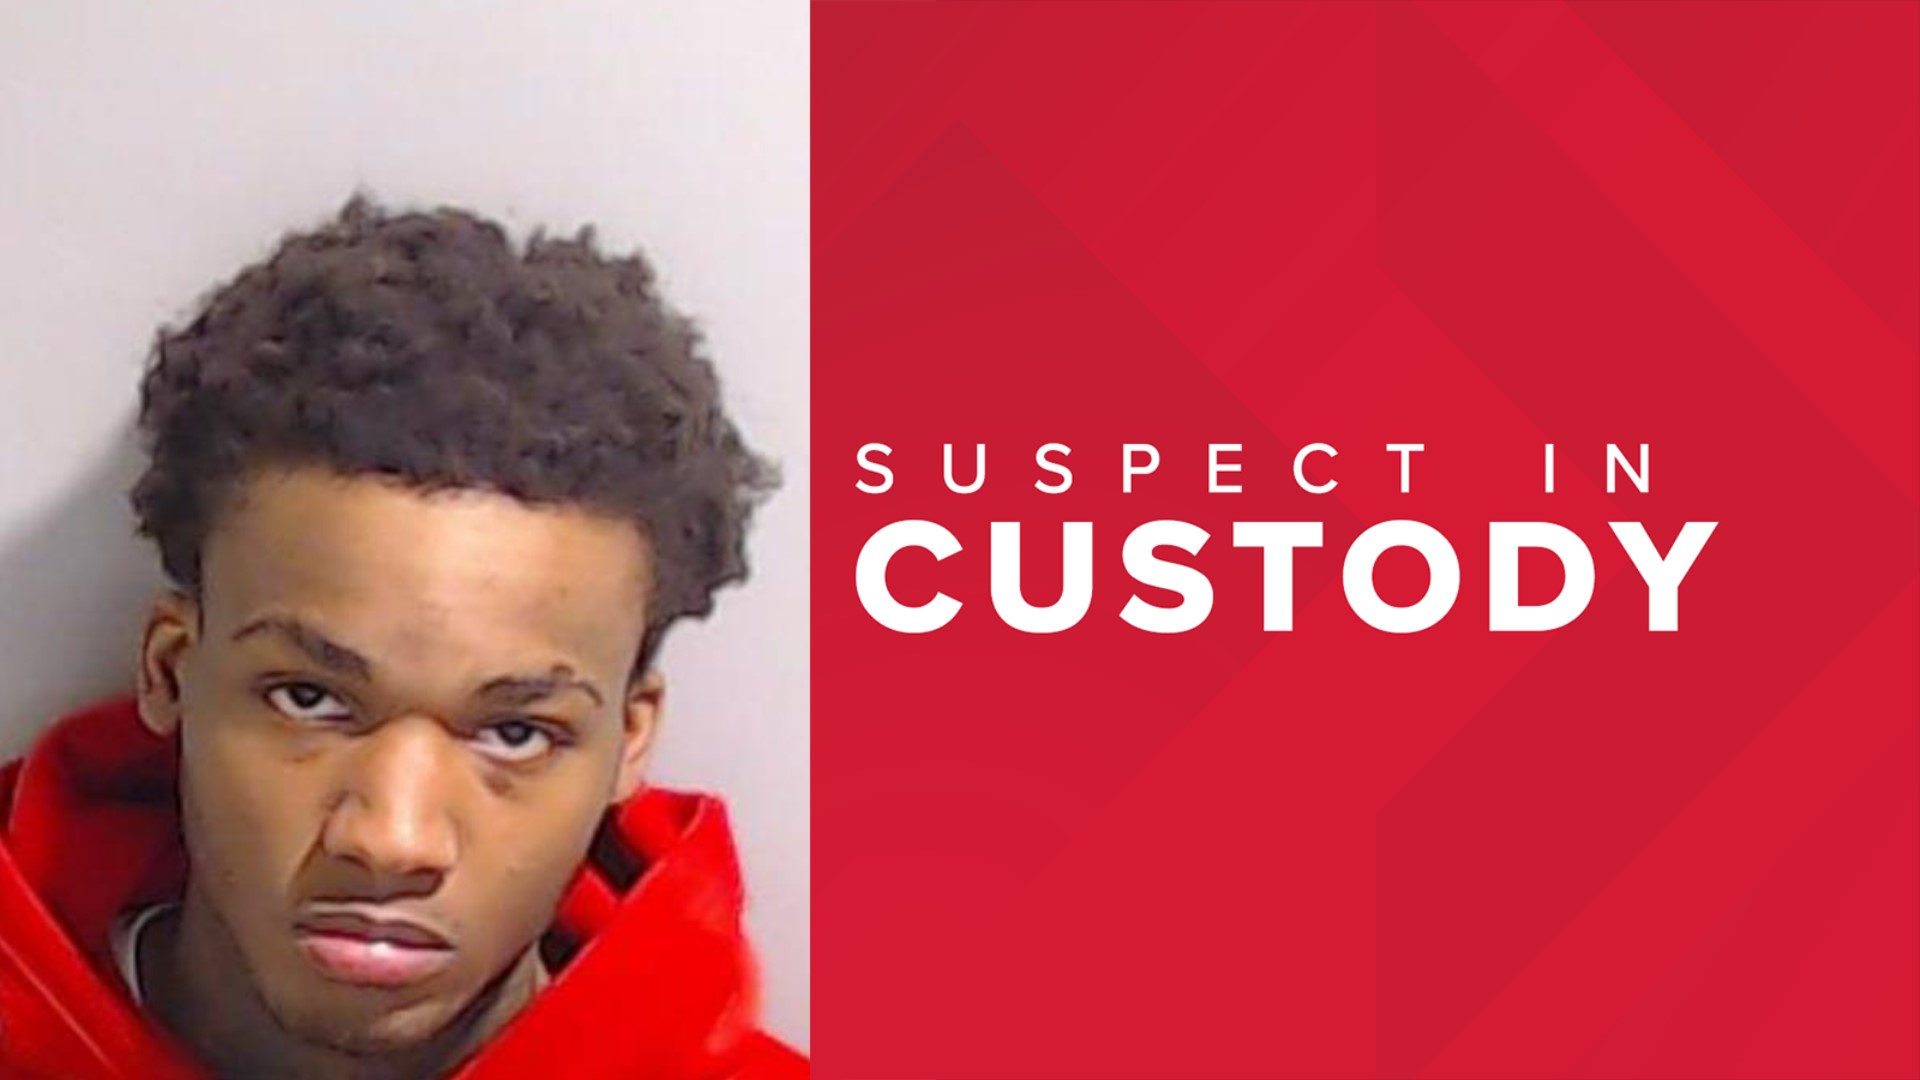 Jakobe Moody was taken into custody in connection to a deadly shooting that took the life of 28-year-old Tremaine Glasper.